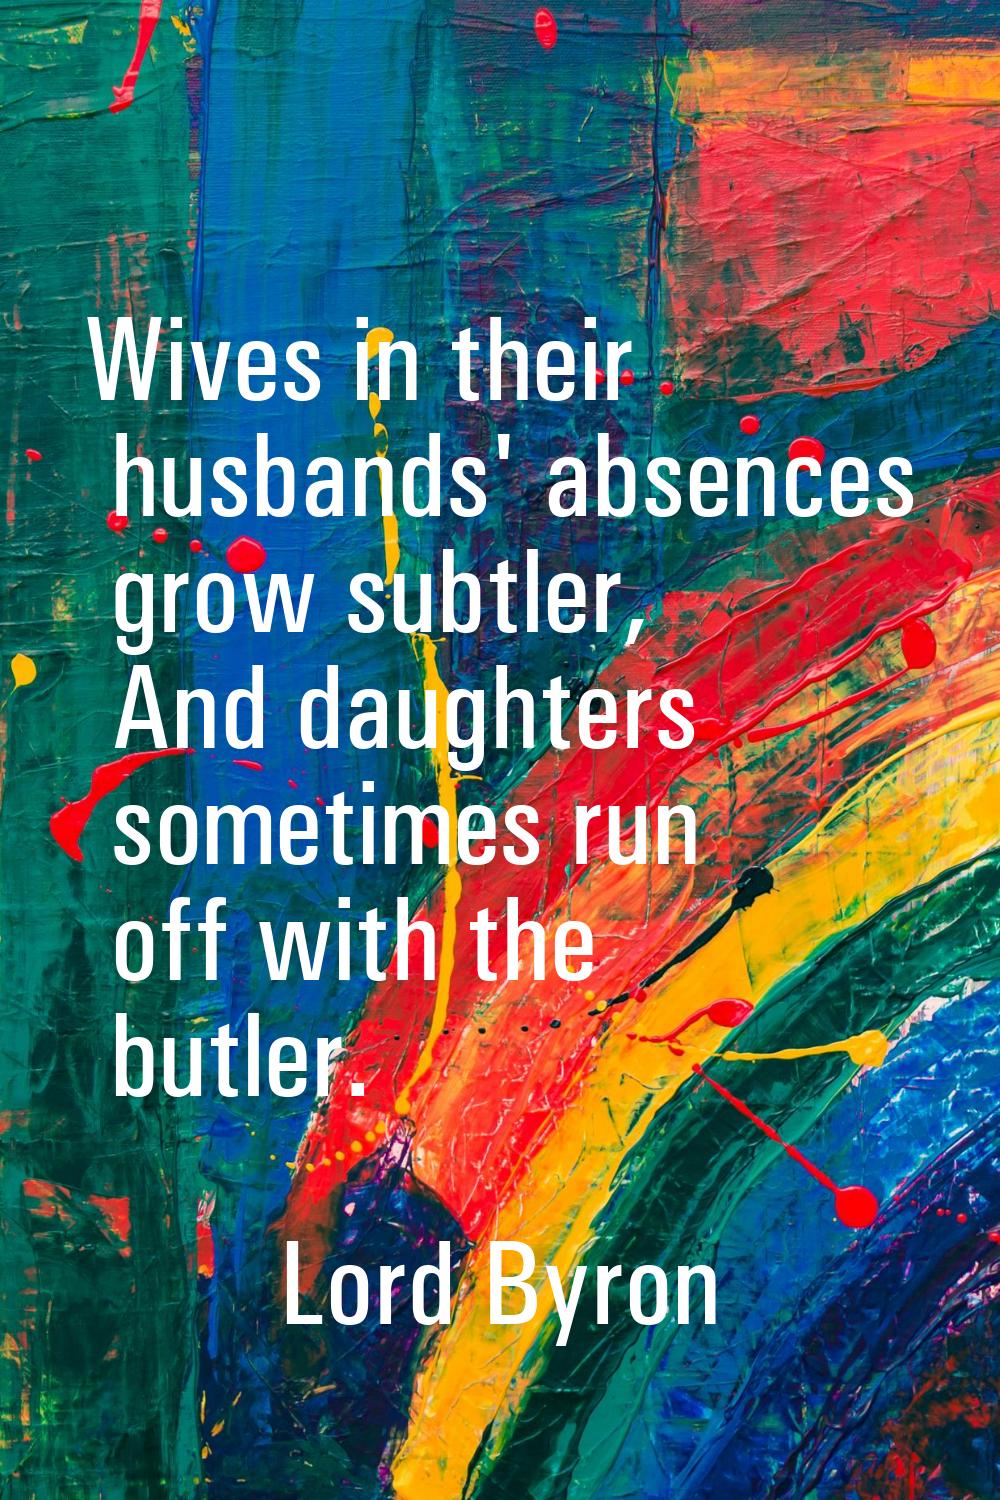 Wives in their husbands' absences grow subtler, And daughters sometimes run off with the butler.